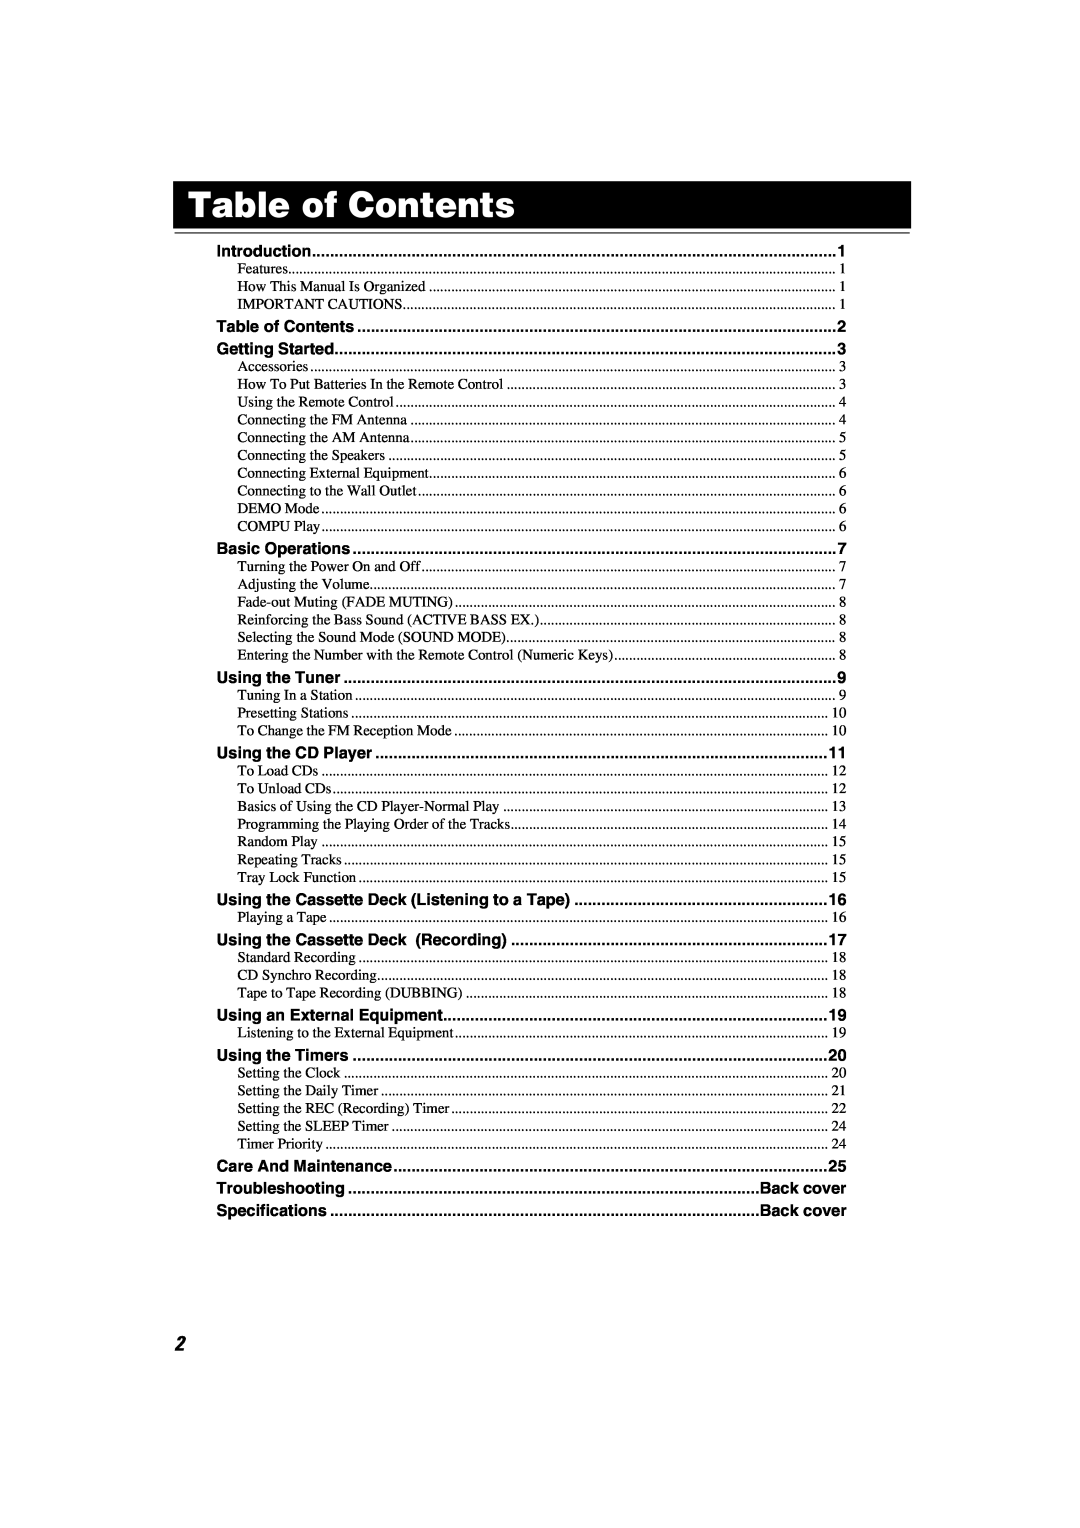 JVC MX-K10 manual Table of Contents, Troubleshooting, Specifications 